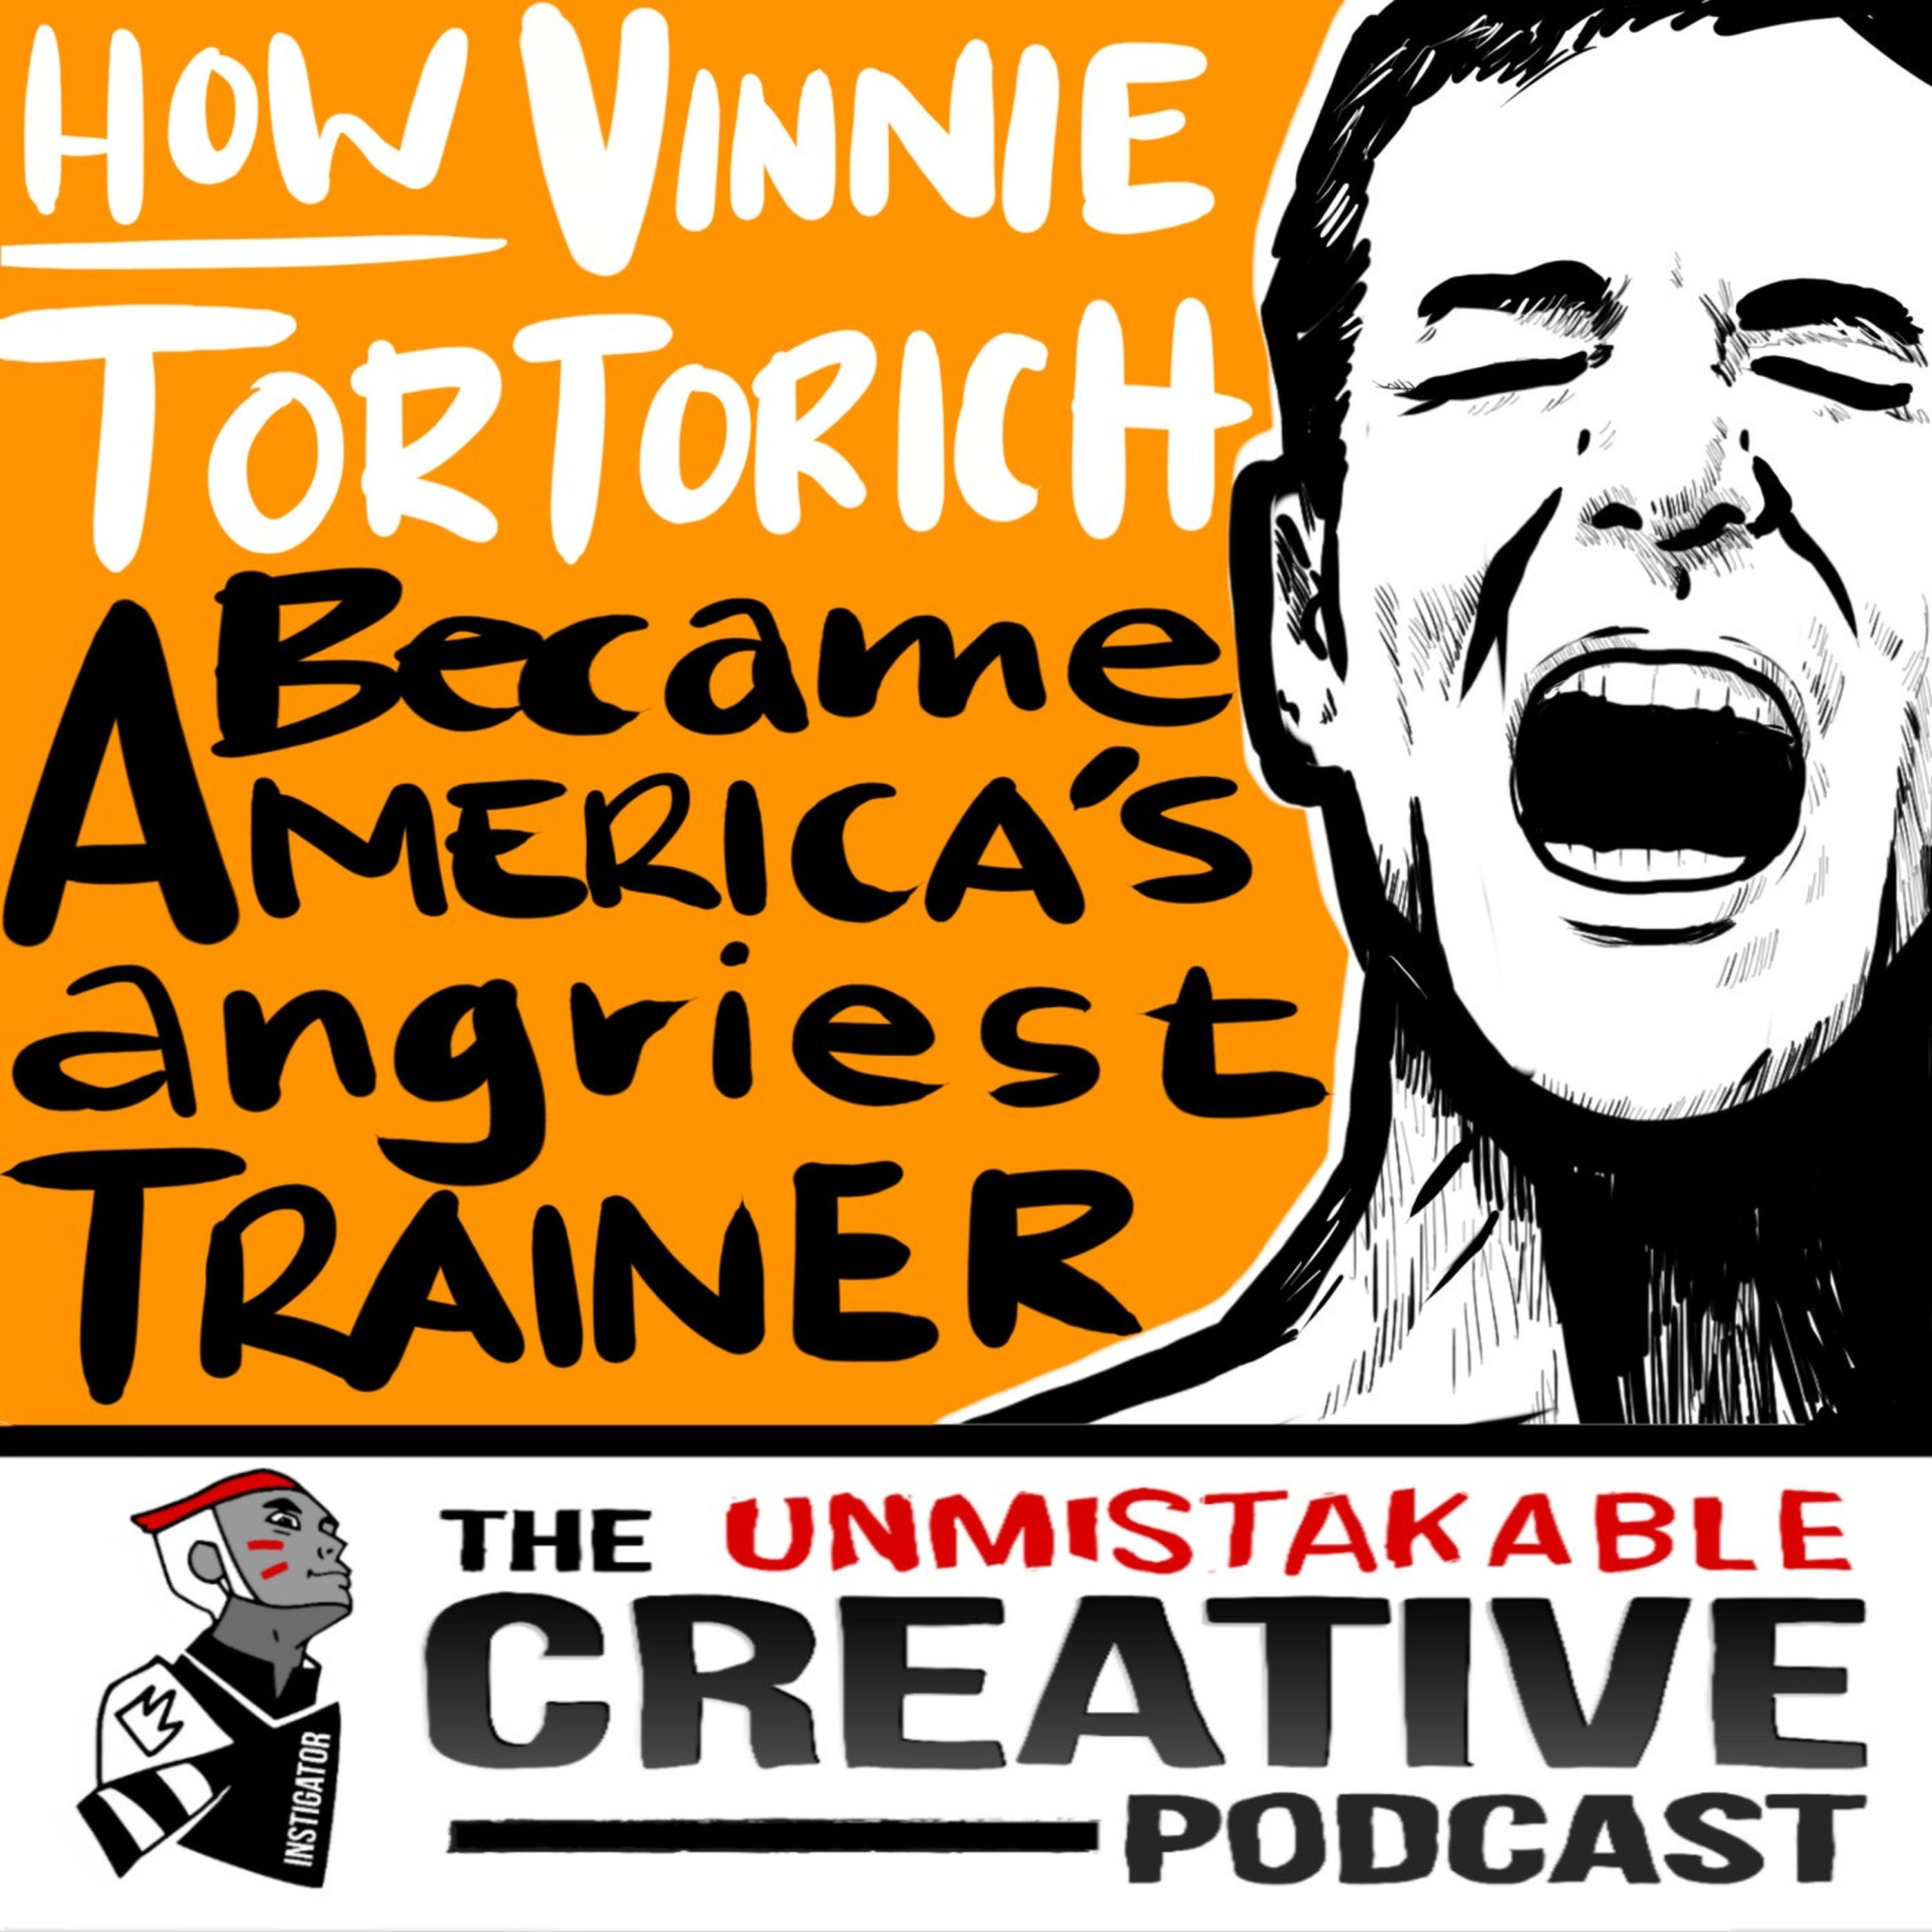 How Vinnie Tortorich Became America’s Angriest Trainer